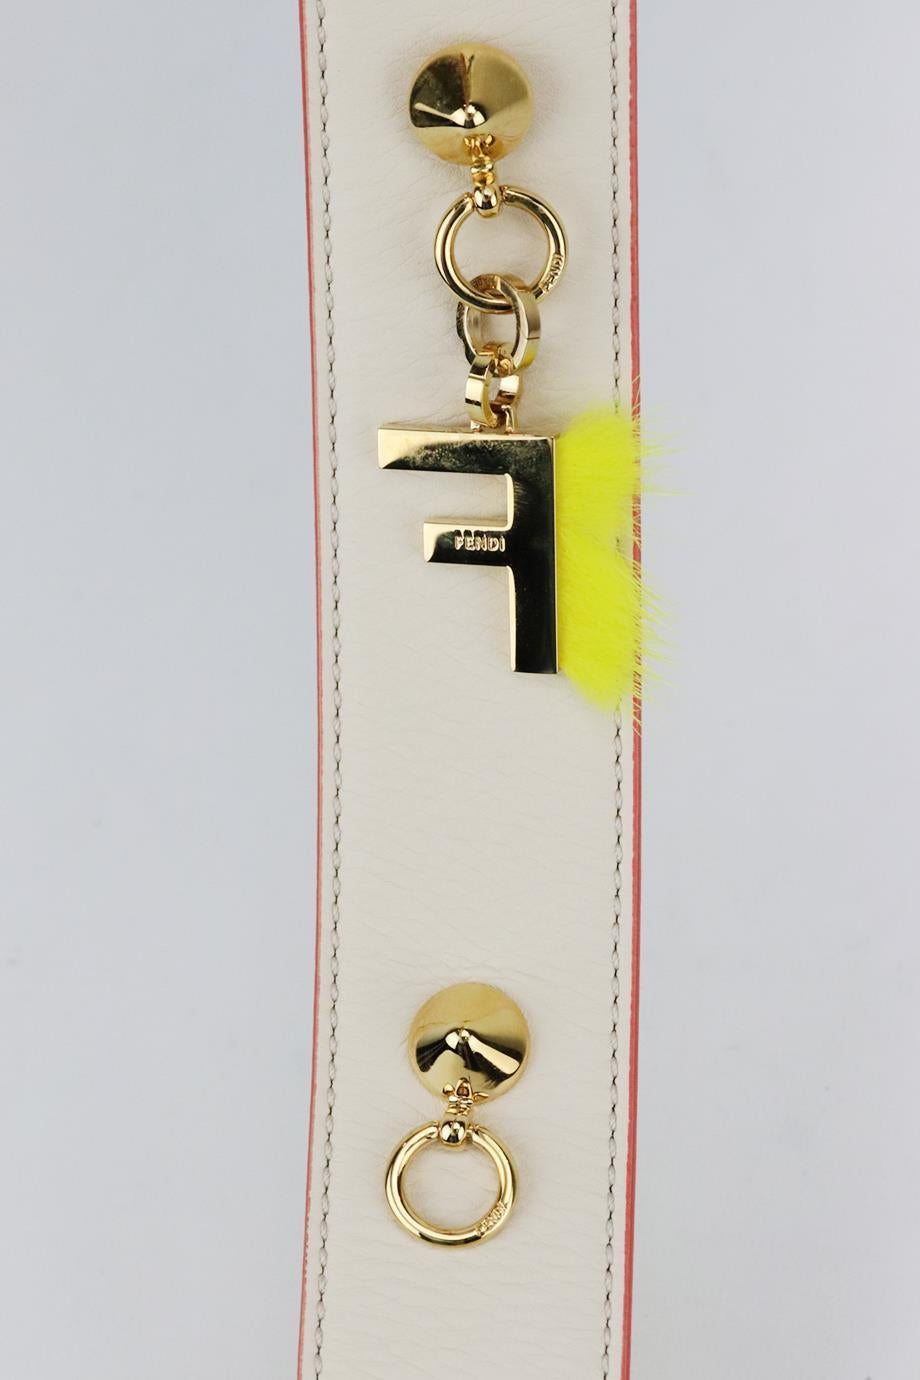 Fendi two tone leather bag strap with charm. Made from ecru, navy and yellow leather with red and blue trim and gold-tone clasps, it also comes with a detachable 'F' charm. L: 44 in. W: 1.5 in